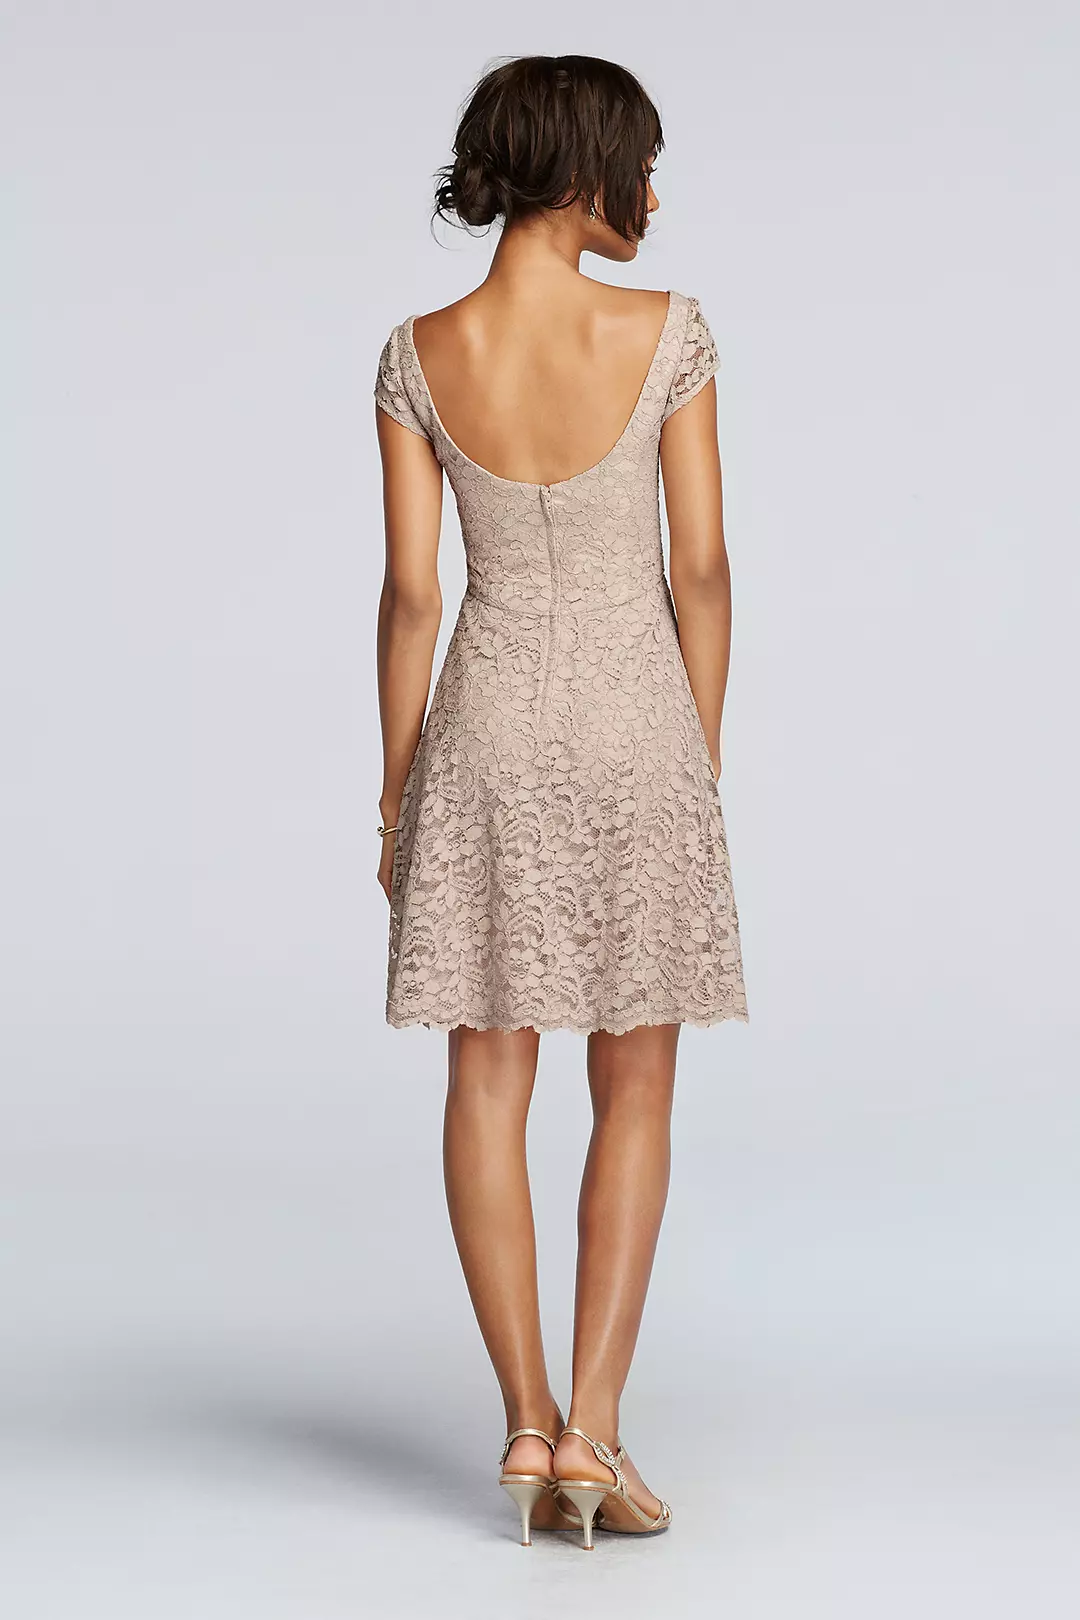 Short Lace Bridesmaid Dress with Cap Sleeves Image 2